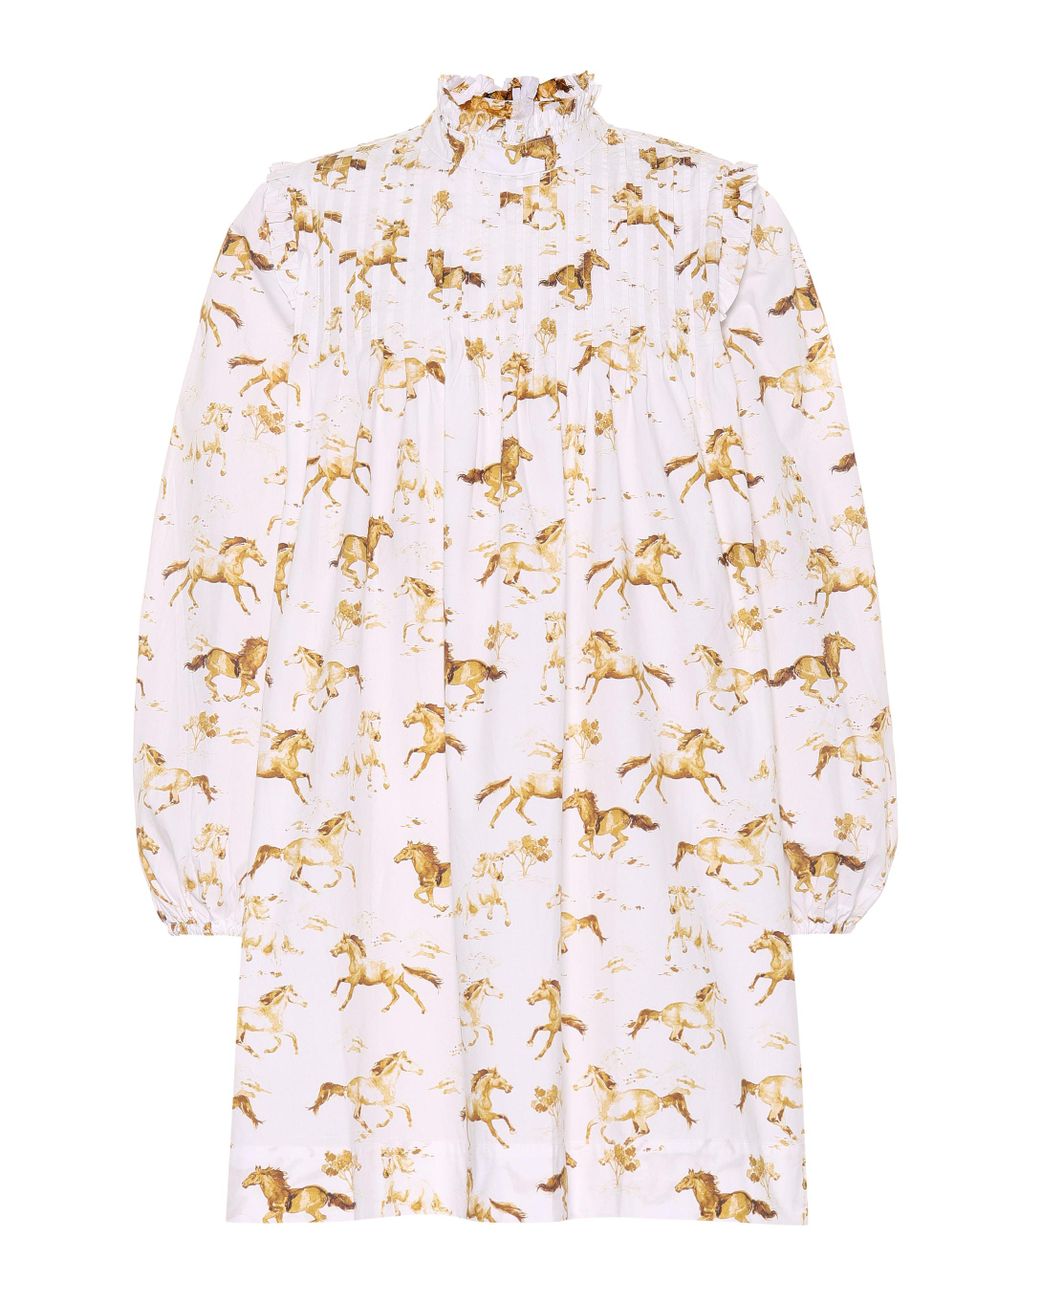 Ganni Horse-printed Cotton Dress in White | Lyst